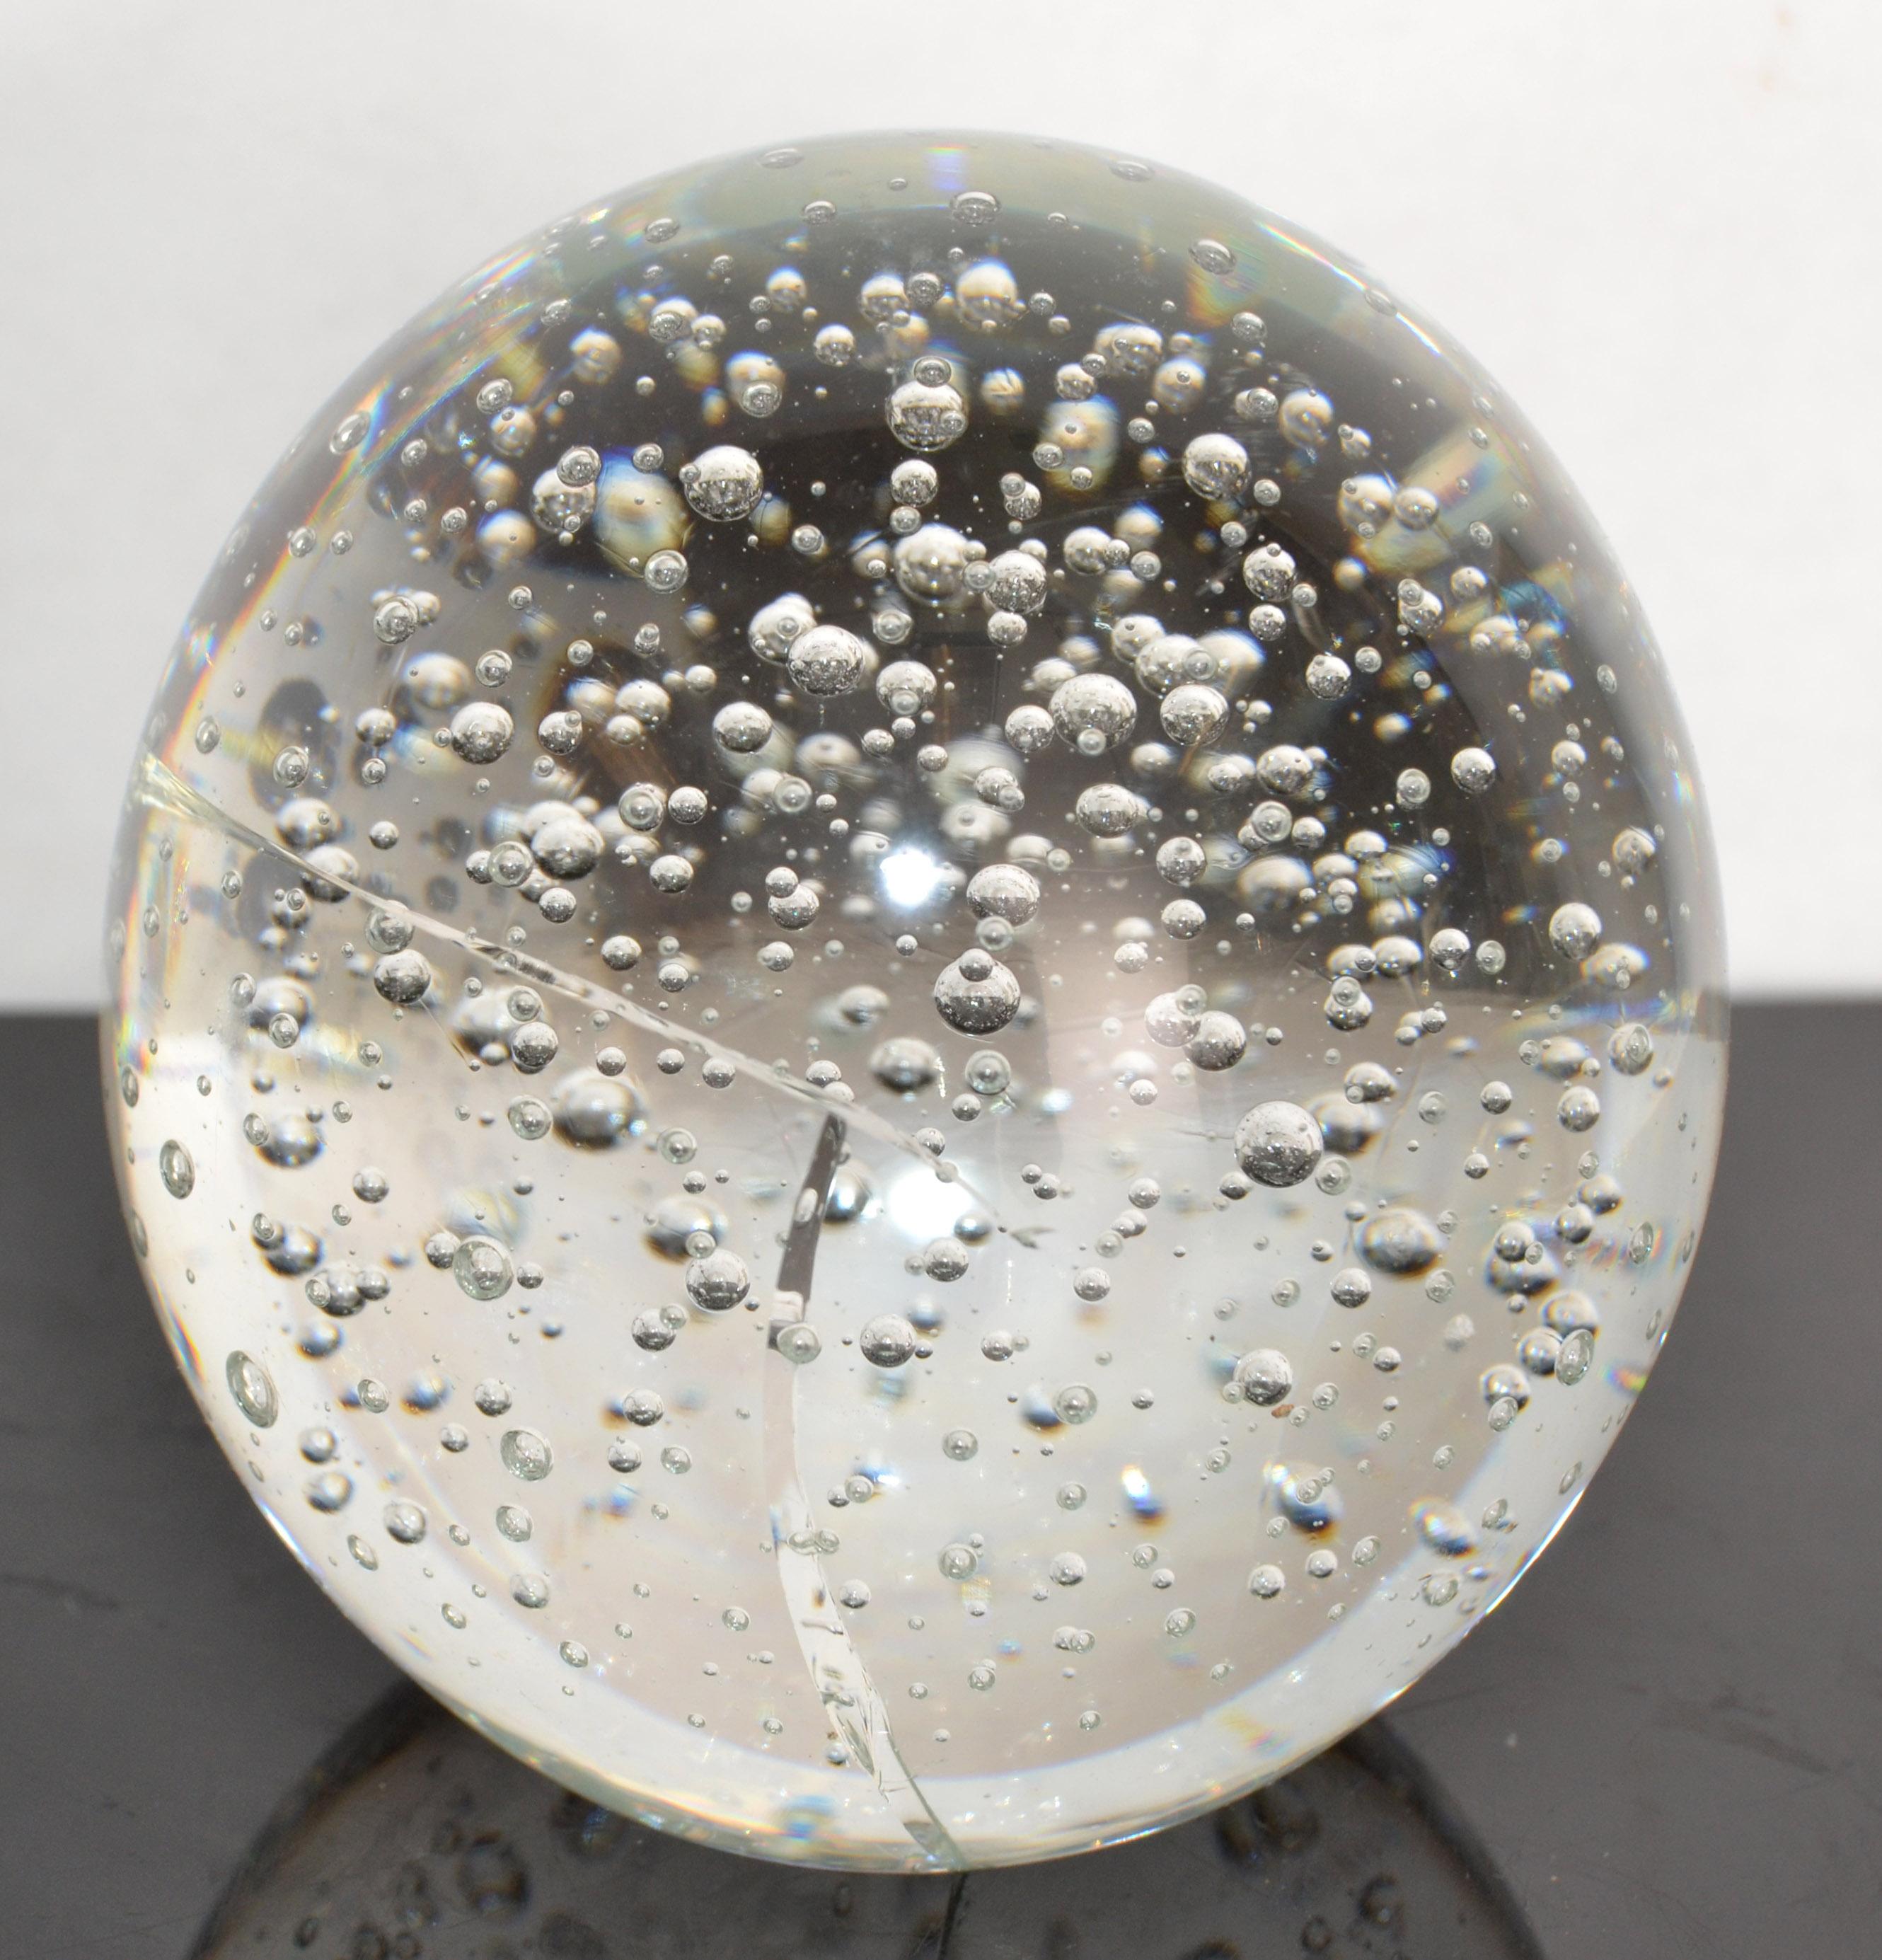 glass with bubbles inside